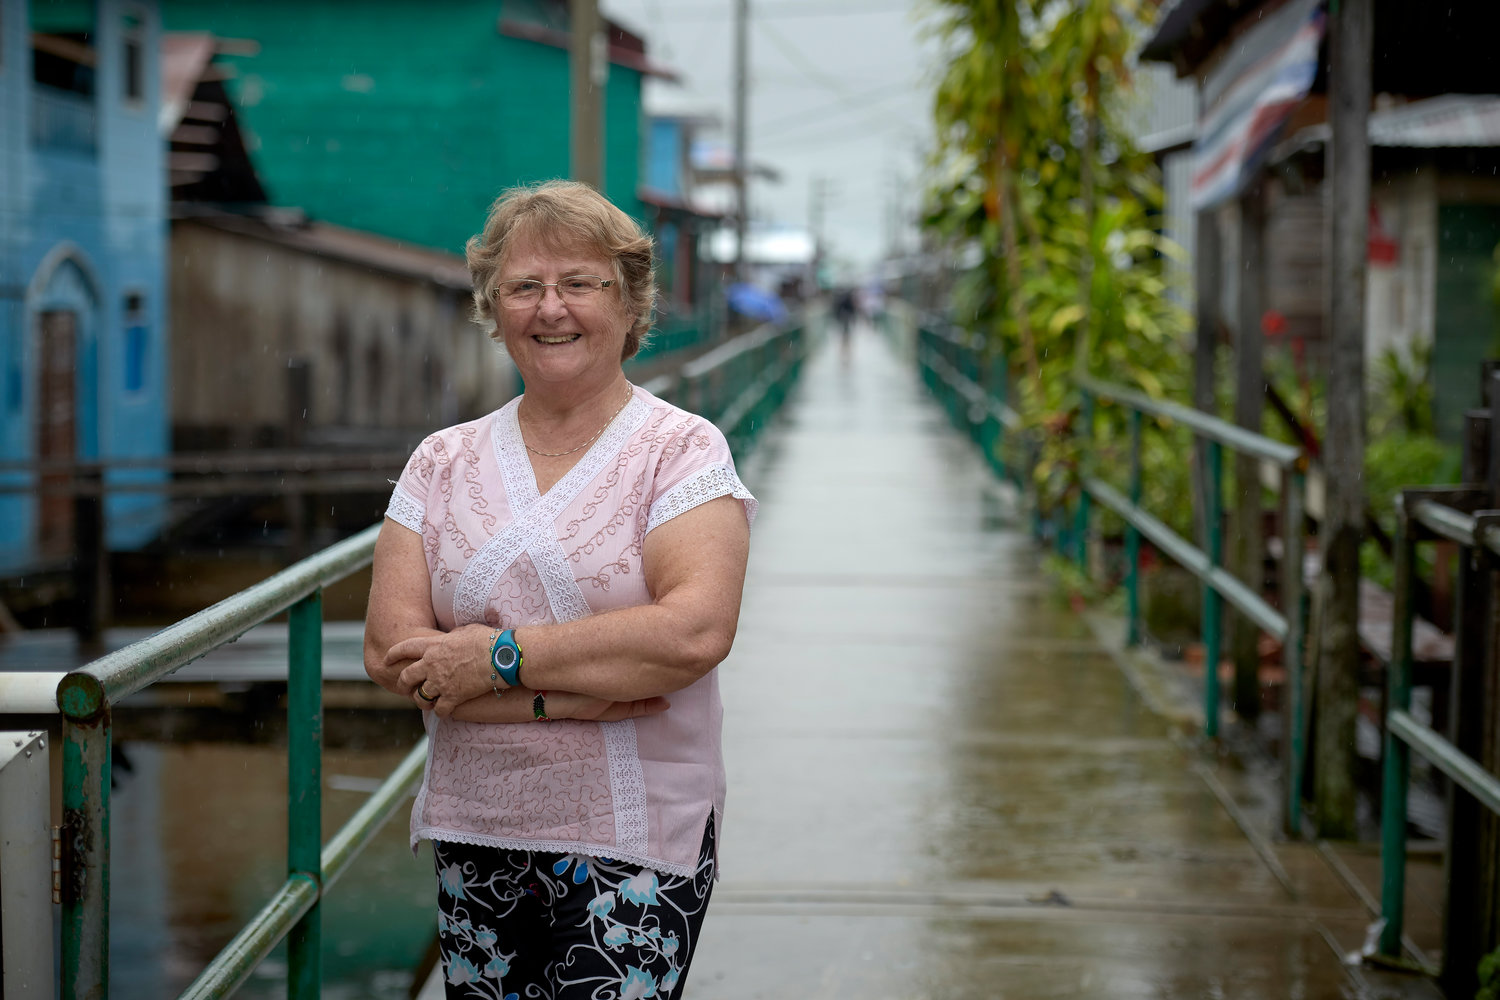 Sister Maria Emilia Molenda Kuche of Parana, Brazil, a member of the Missionaries of Jesus Crucified, is pictured March 28, 2019, in Islandia, a town in the Peruvian Amazon, where she serves.